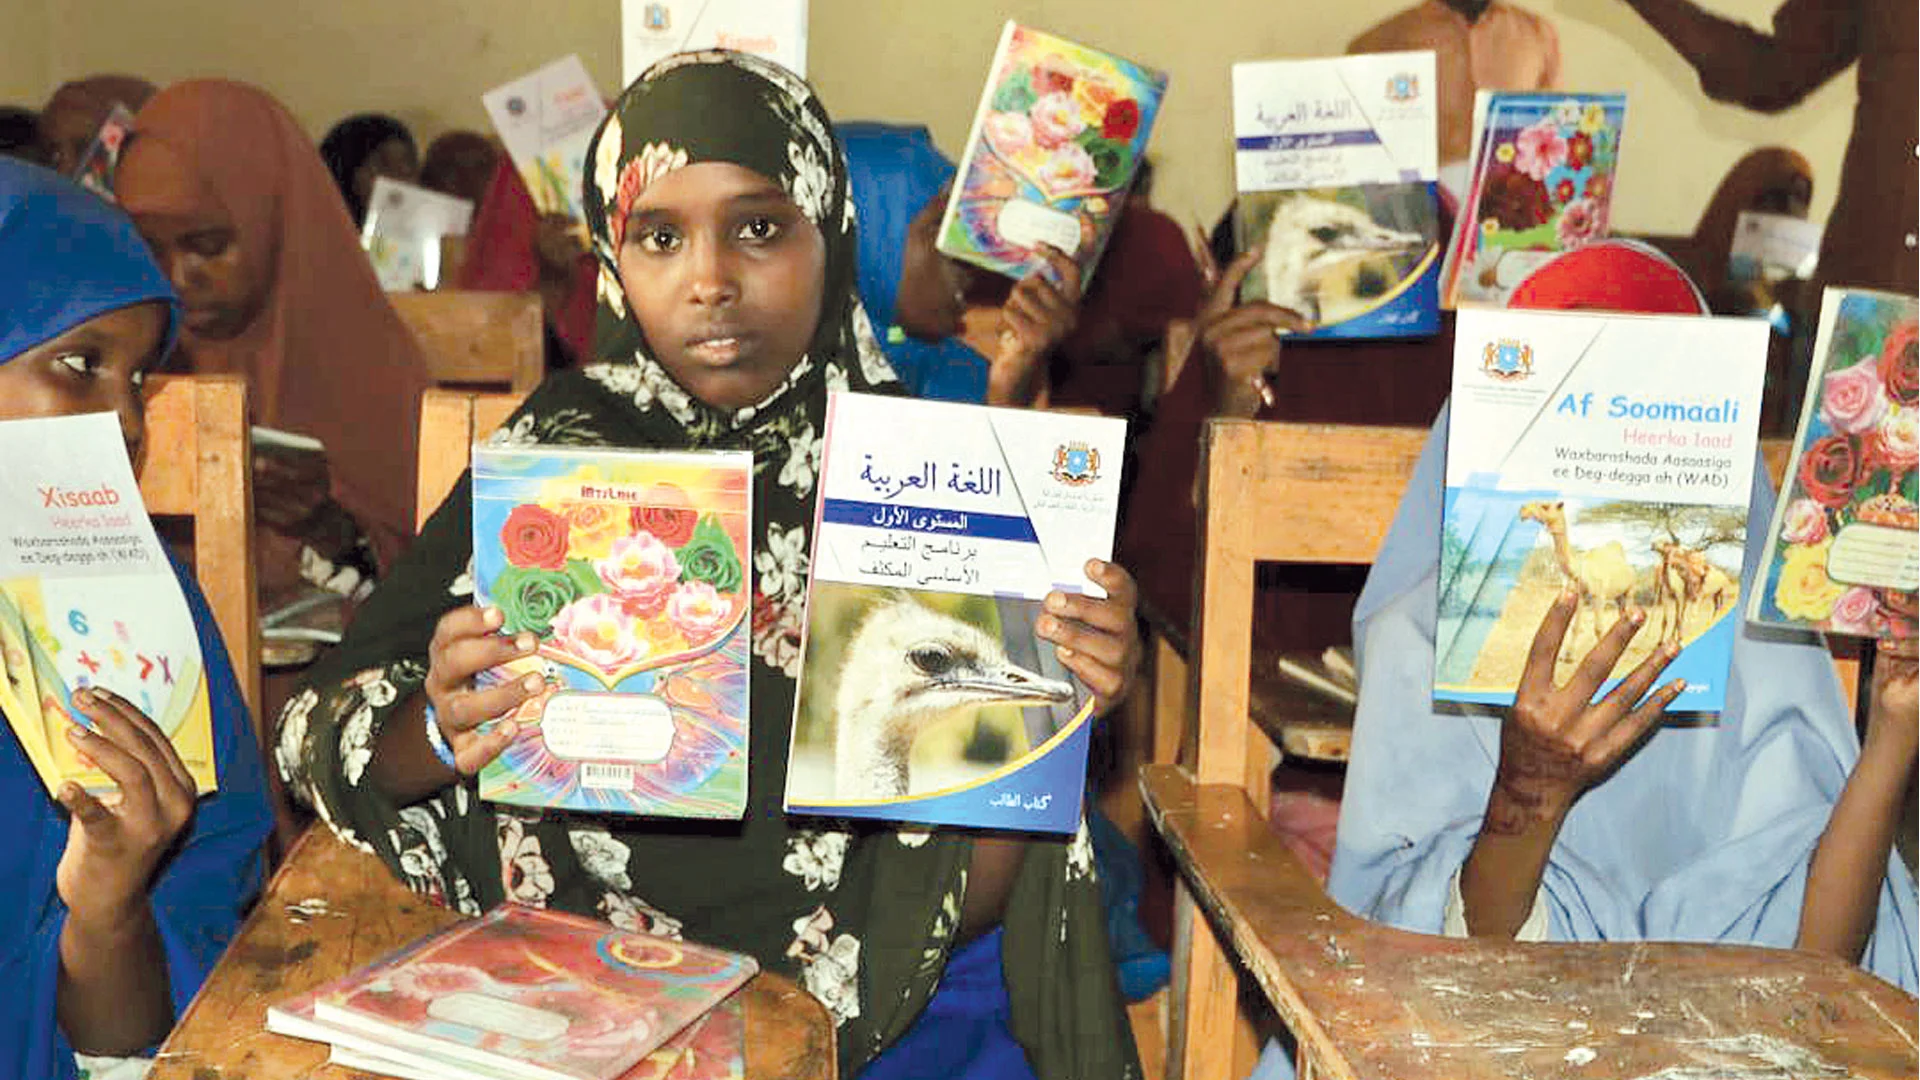 EAA Launches Project to Provide Education Opportunities for Somali Children